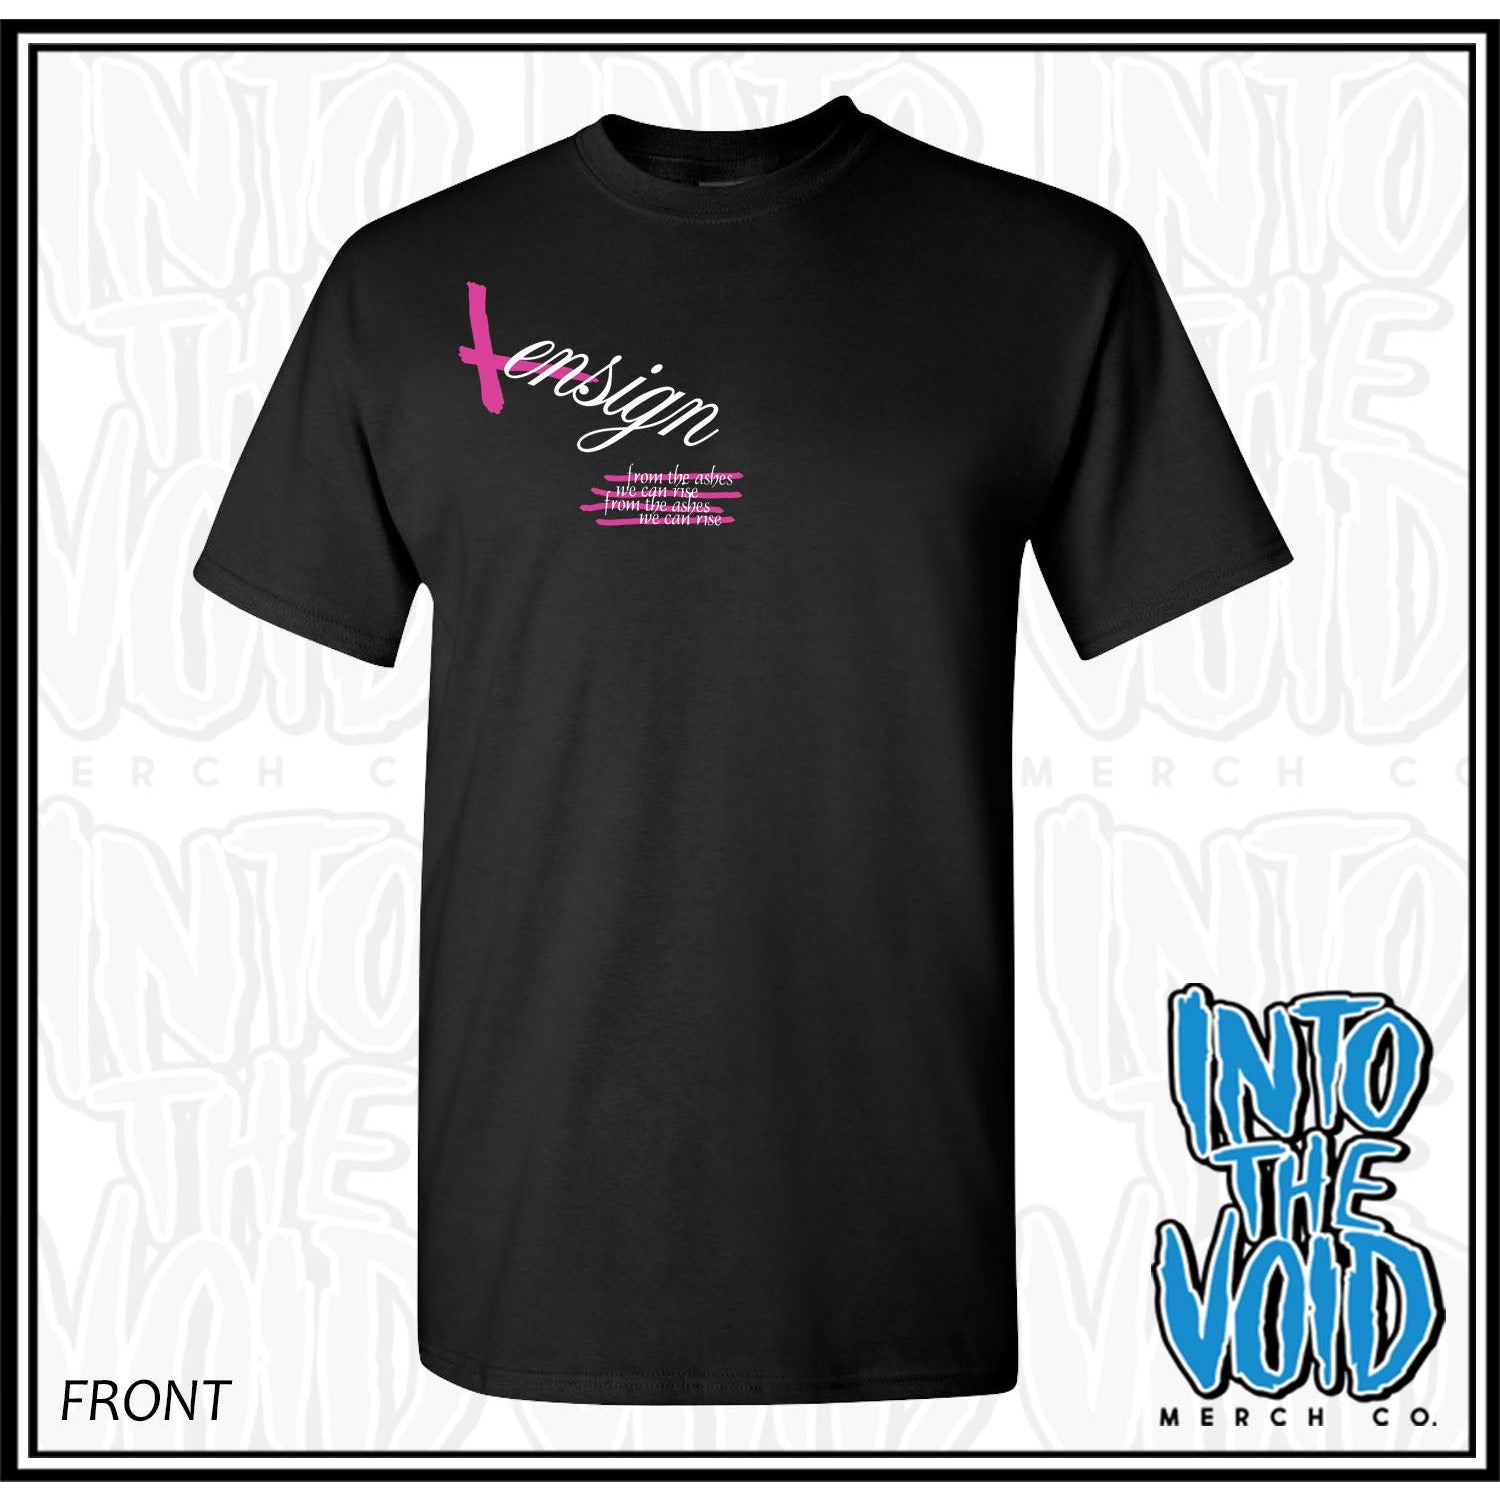 ENSIGN - PINK RIBBON - Short Sleeve T-Shirt - INTO THE VOID Merch Co.